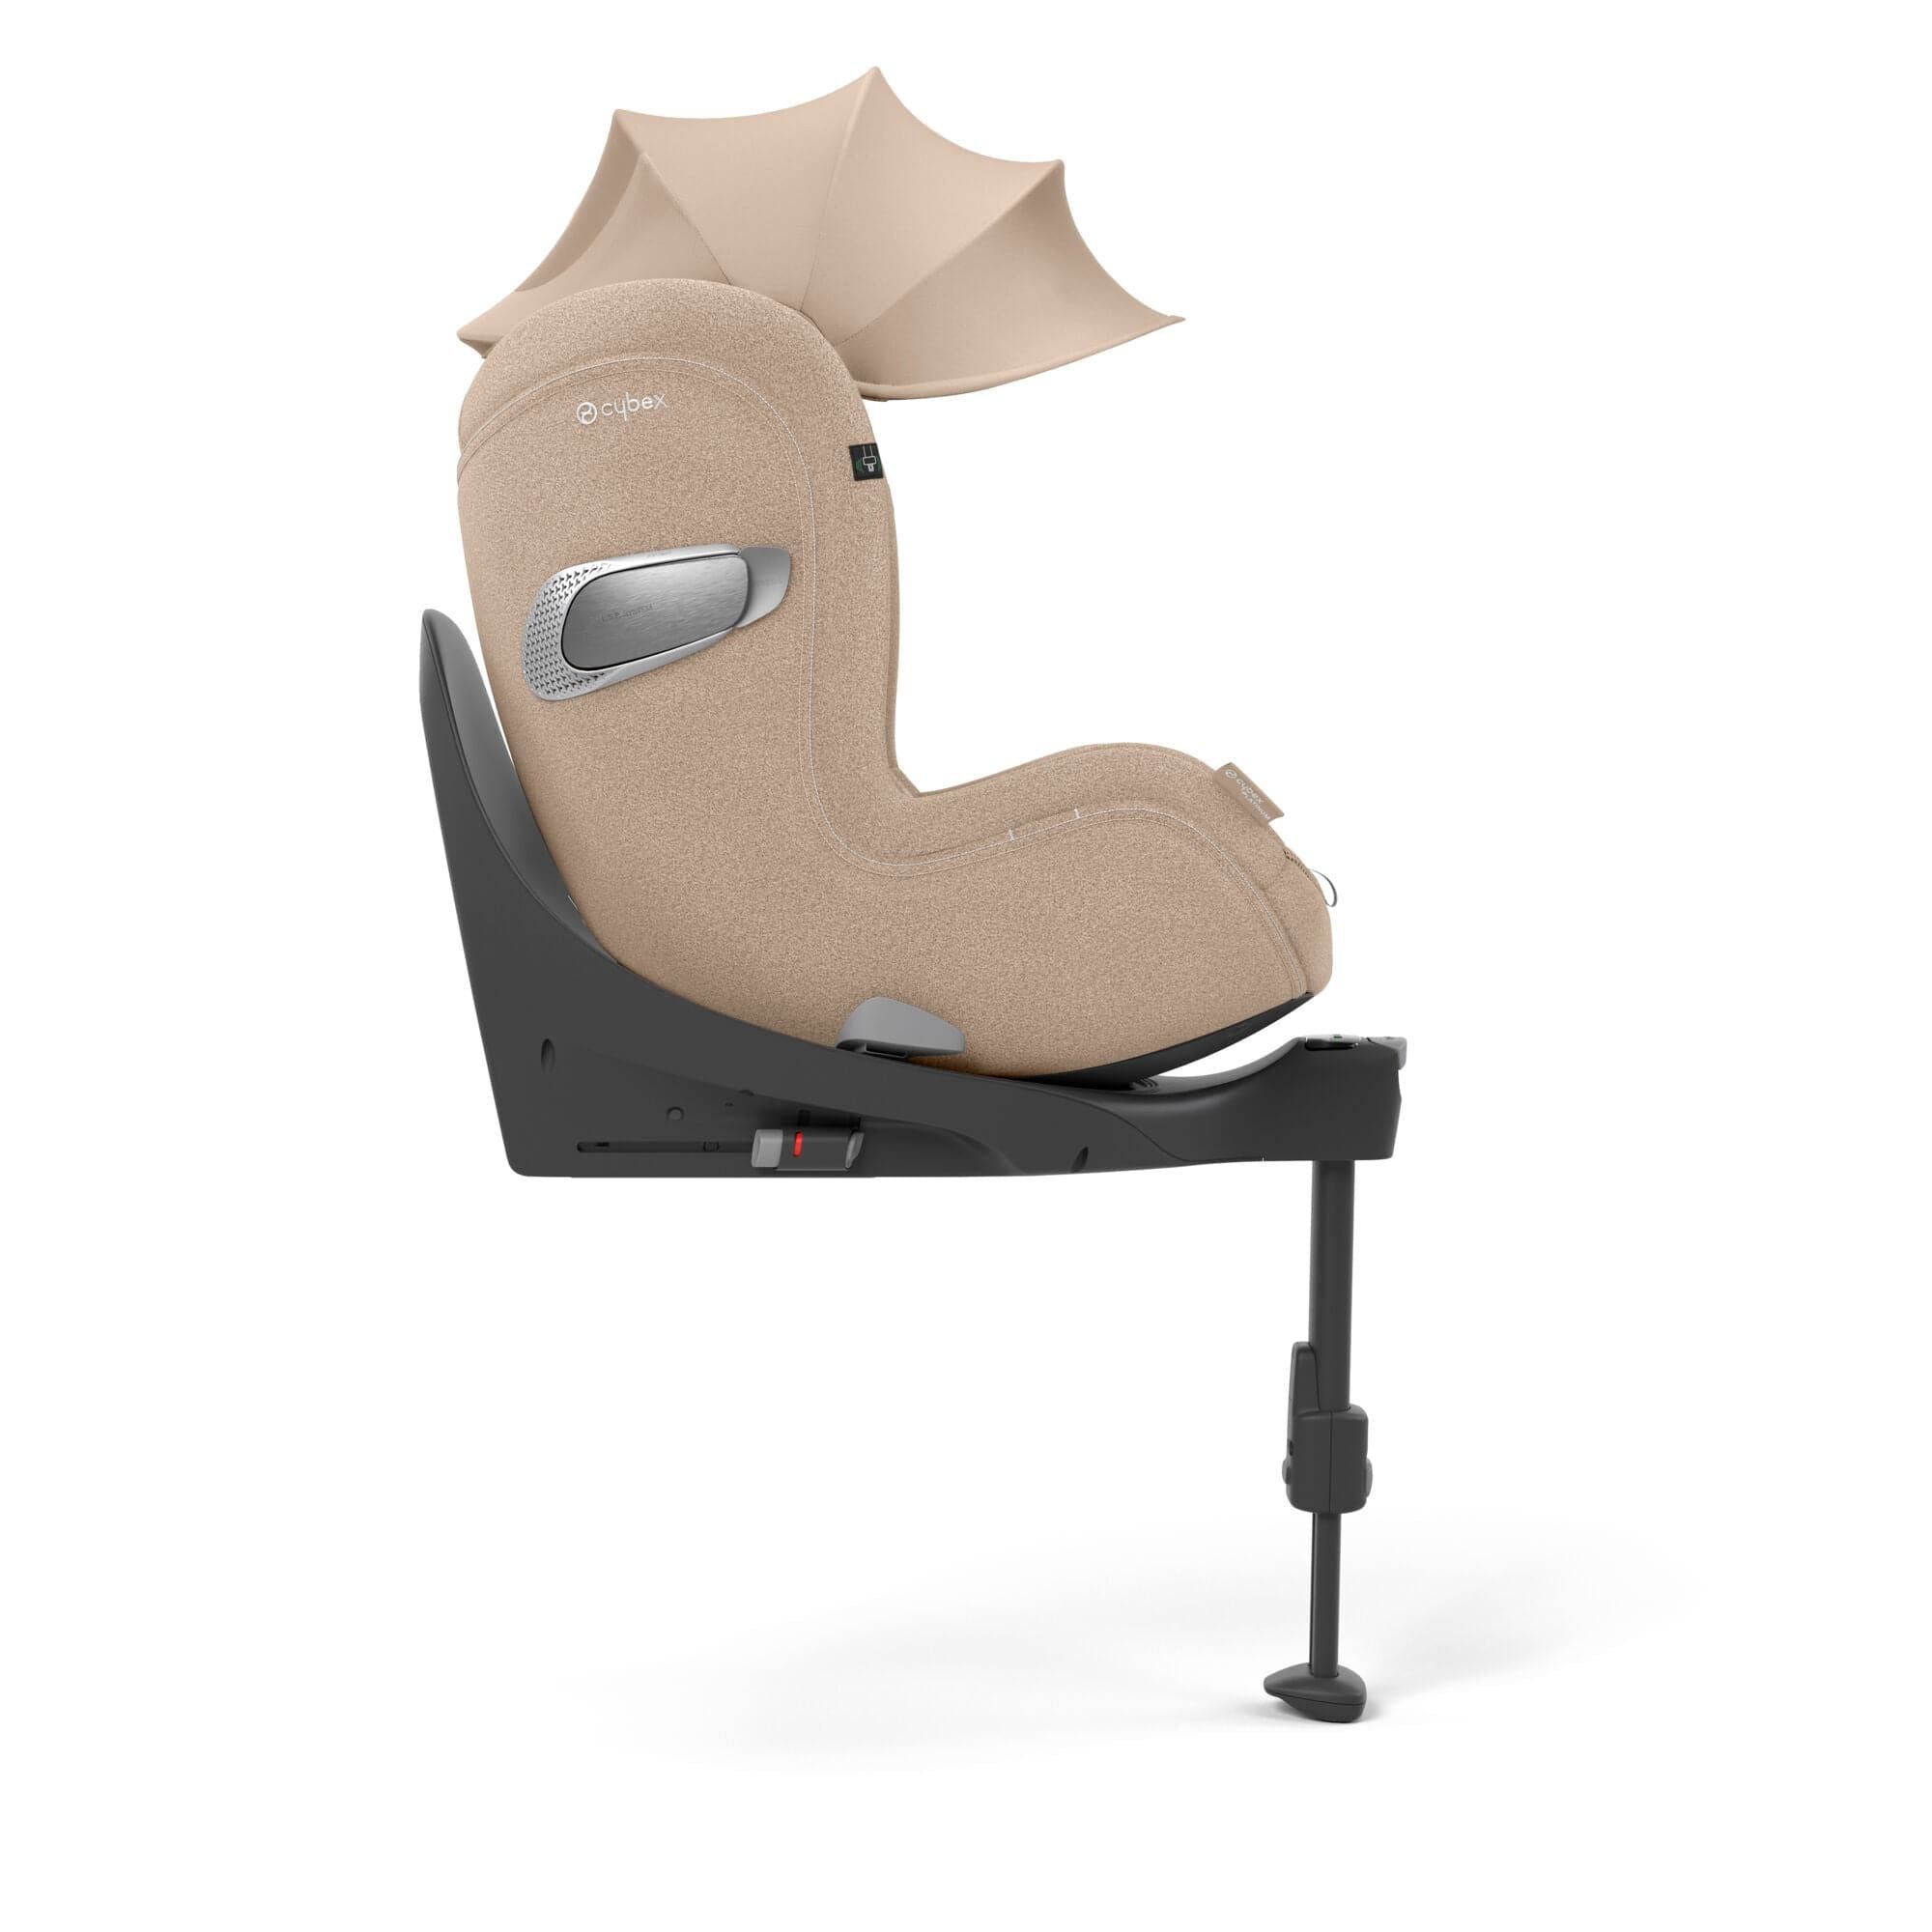 Cybex Sirona T i-Size Plus Car Seat-  Cozy Beige -  | For Your Little One